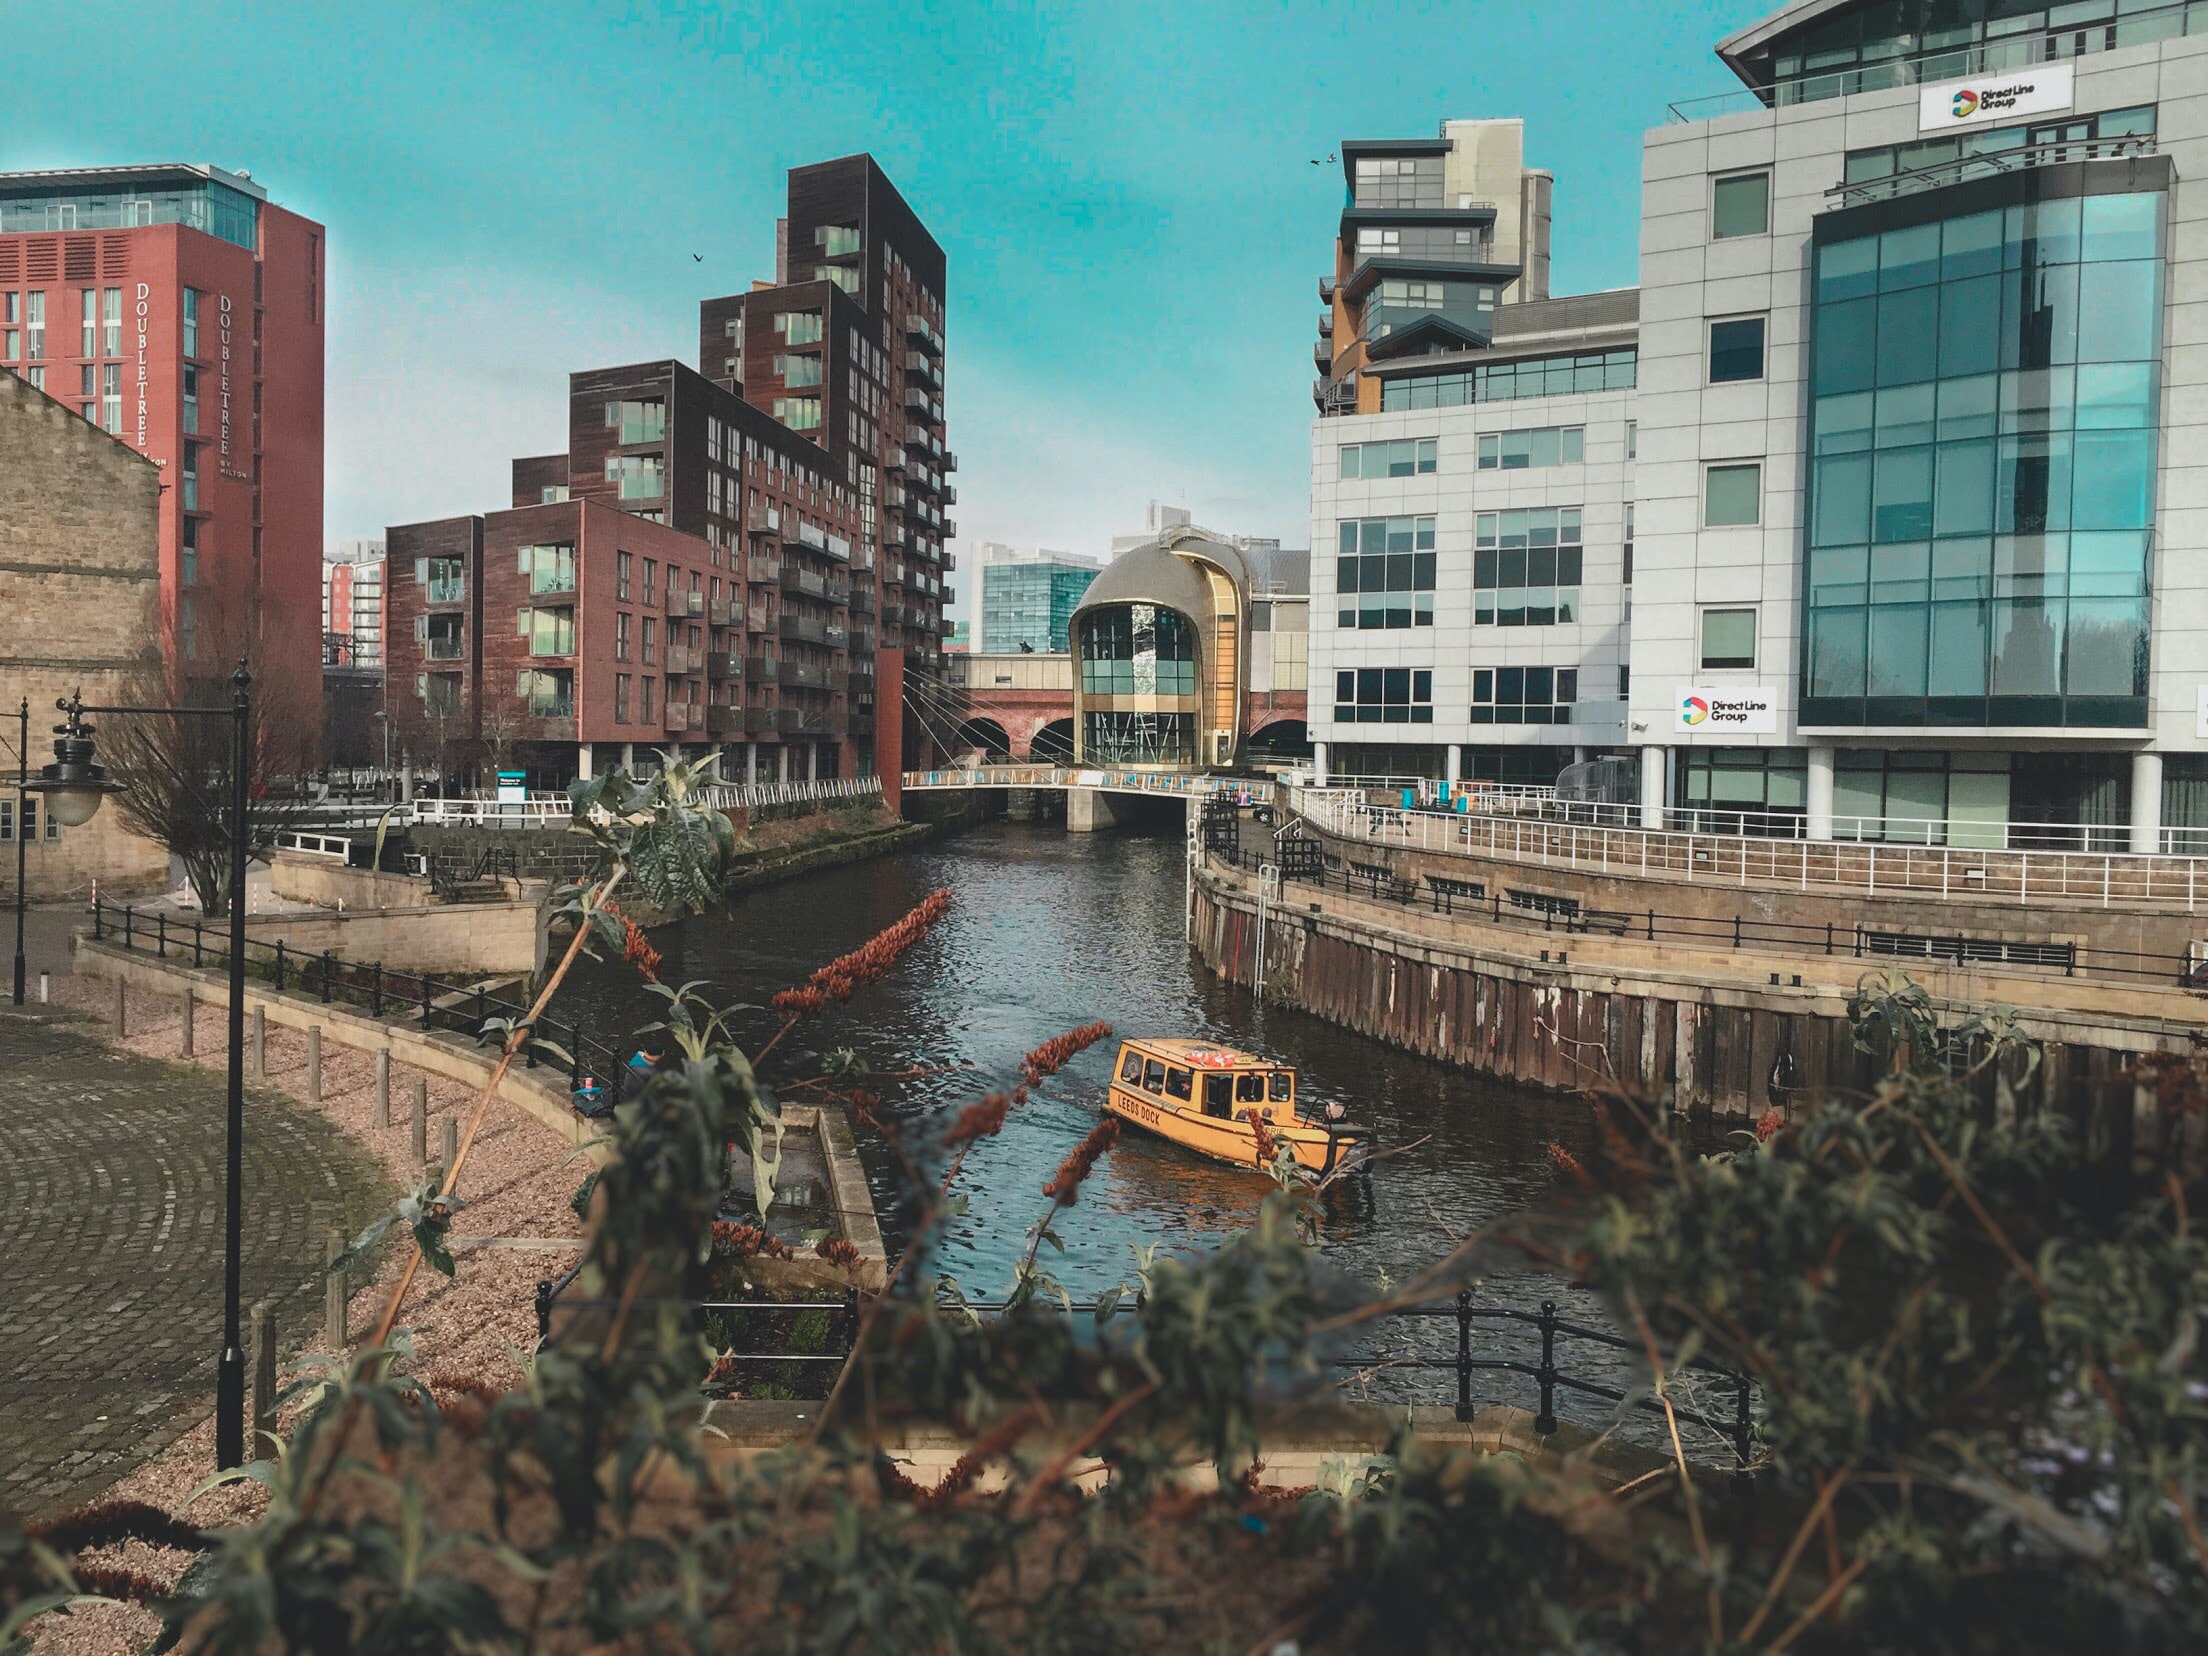 The River Aire running through Leeds city centre with office blocks and apartments either side.